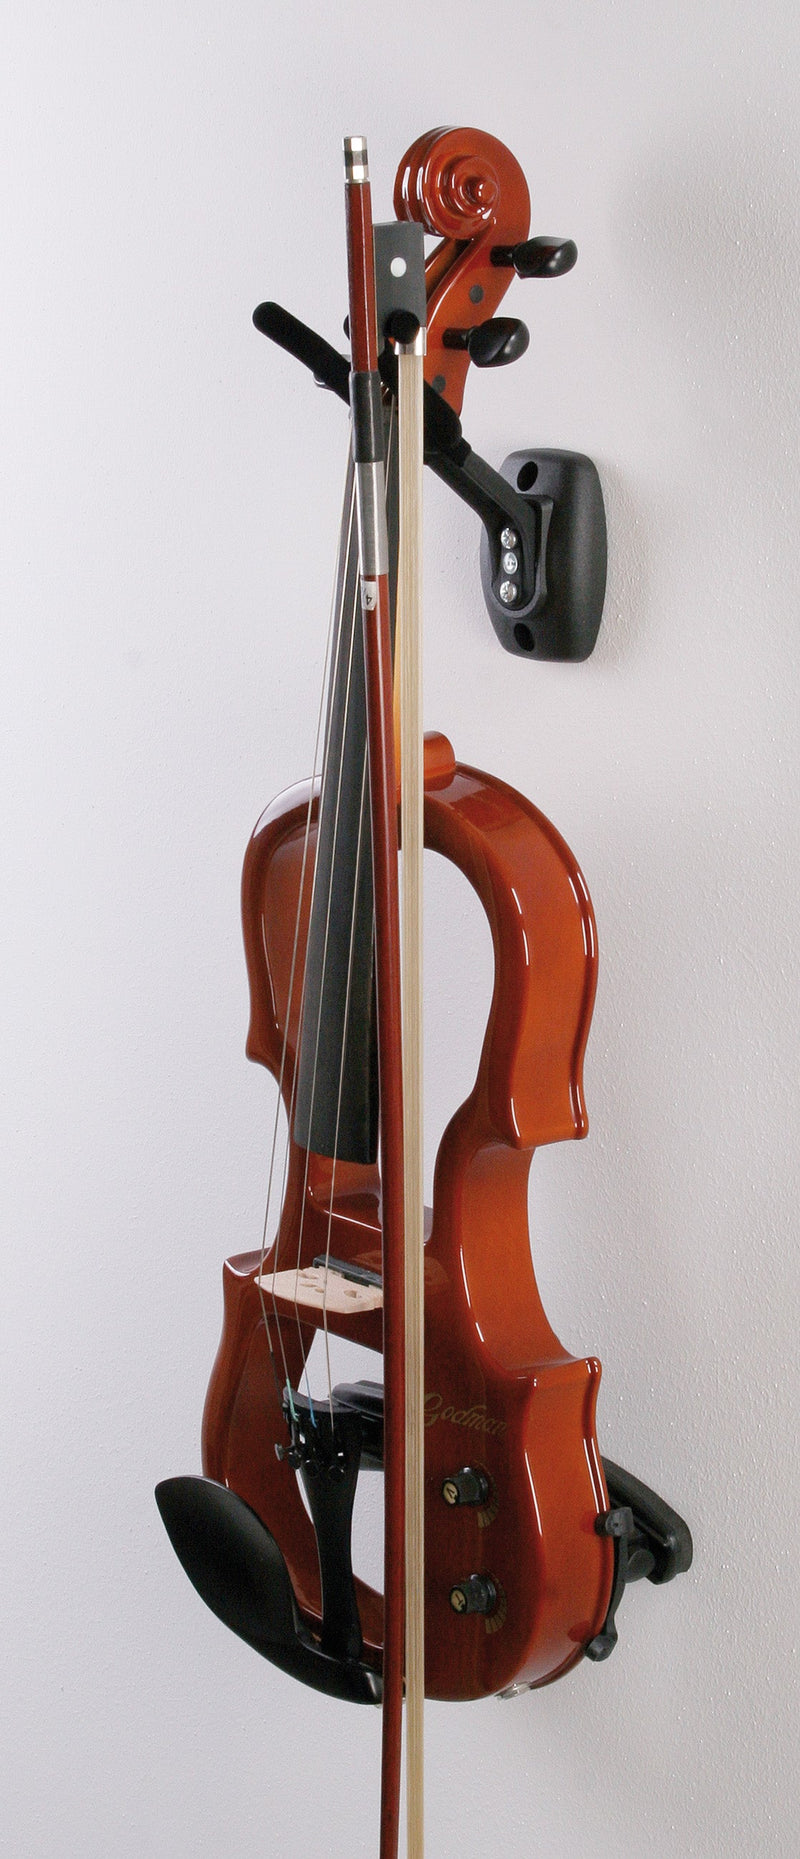 K&M Orchestral Accessories K&M Violin Wall Holder Black Color 16580-000-55 Buy on Feesheh